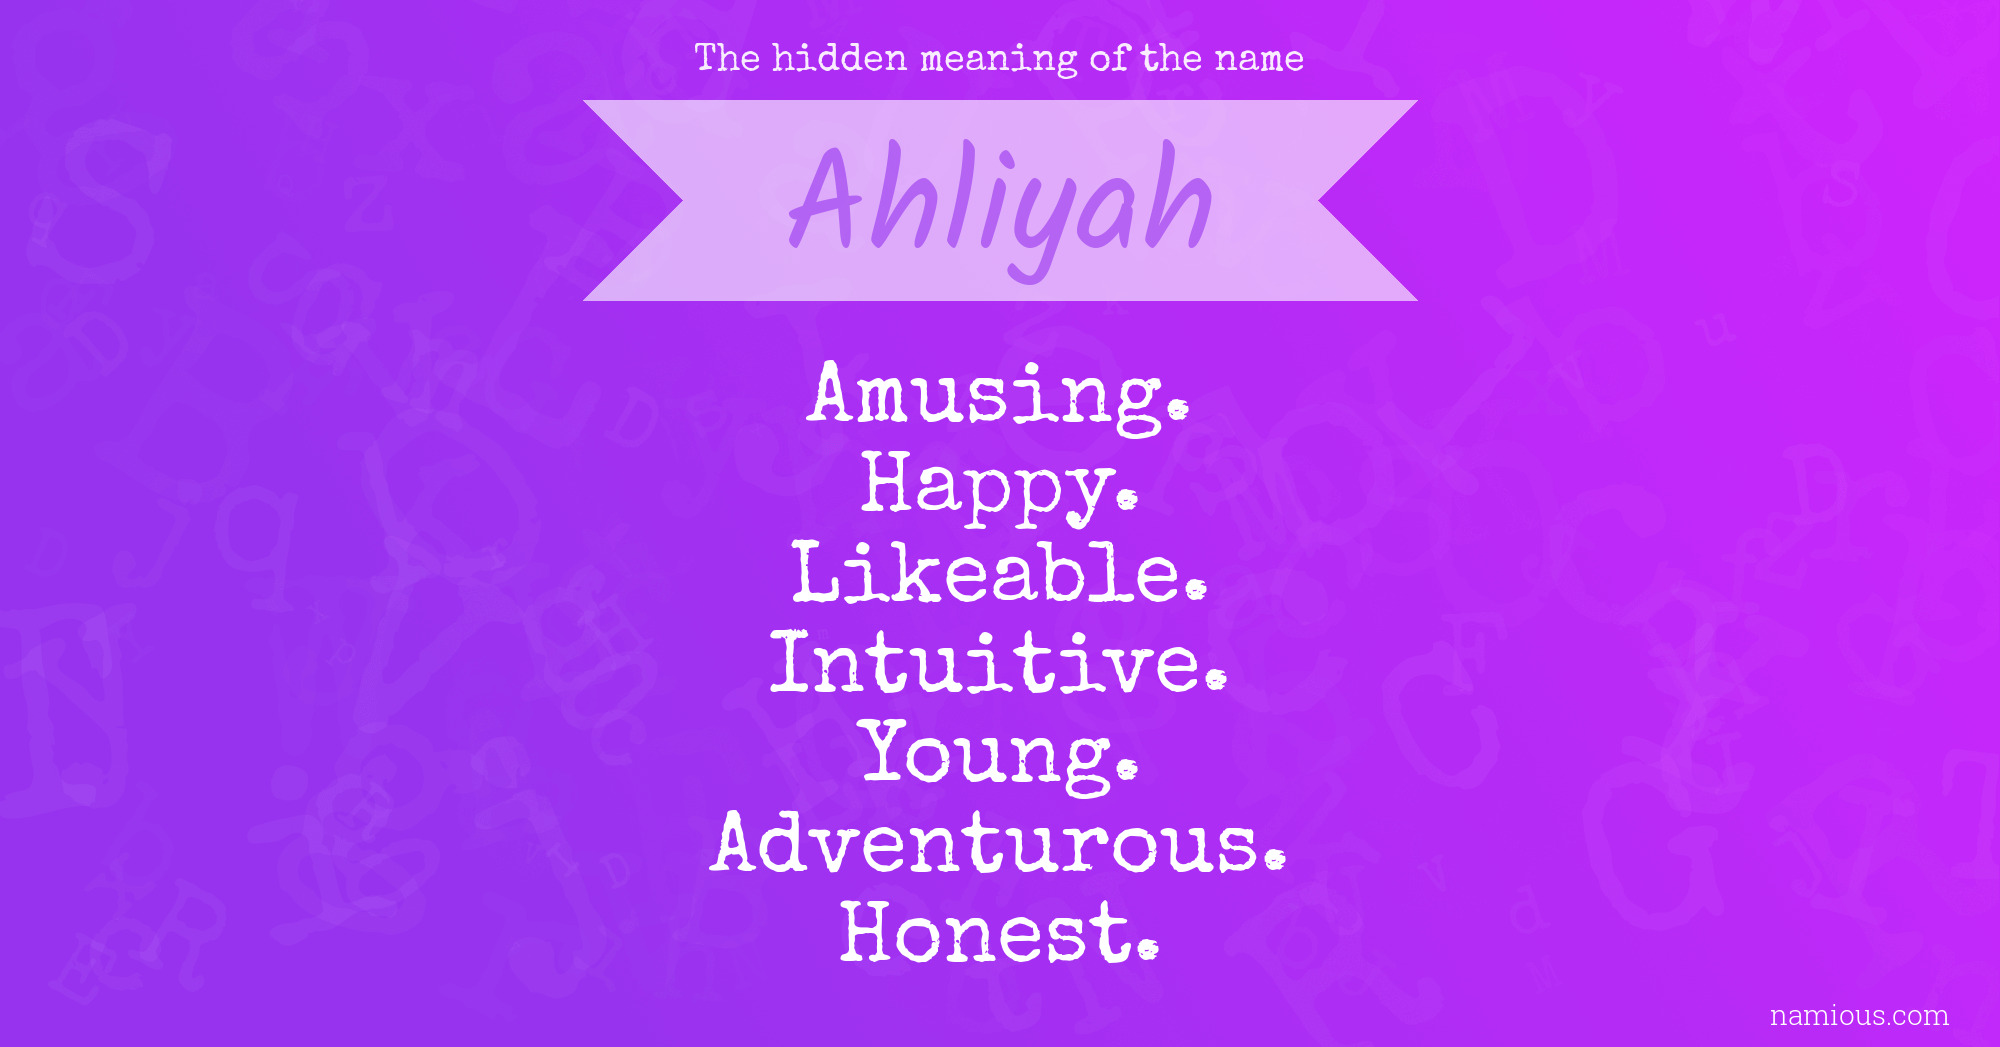 The hidden meaning of the name Ahliyah